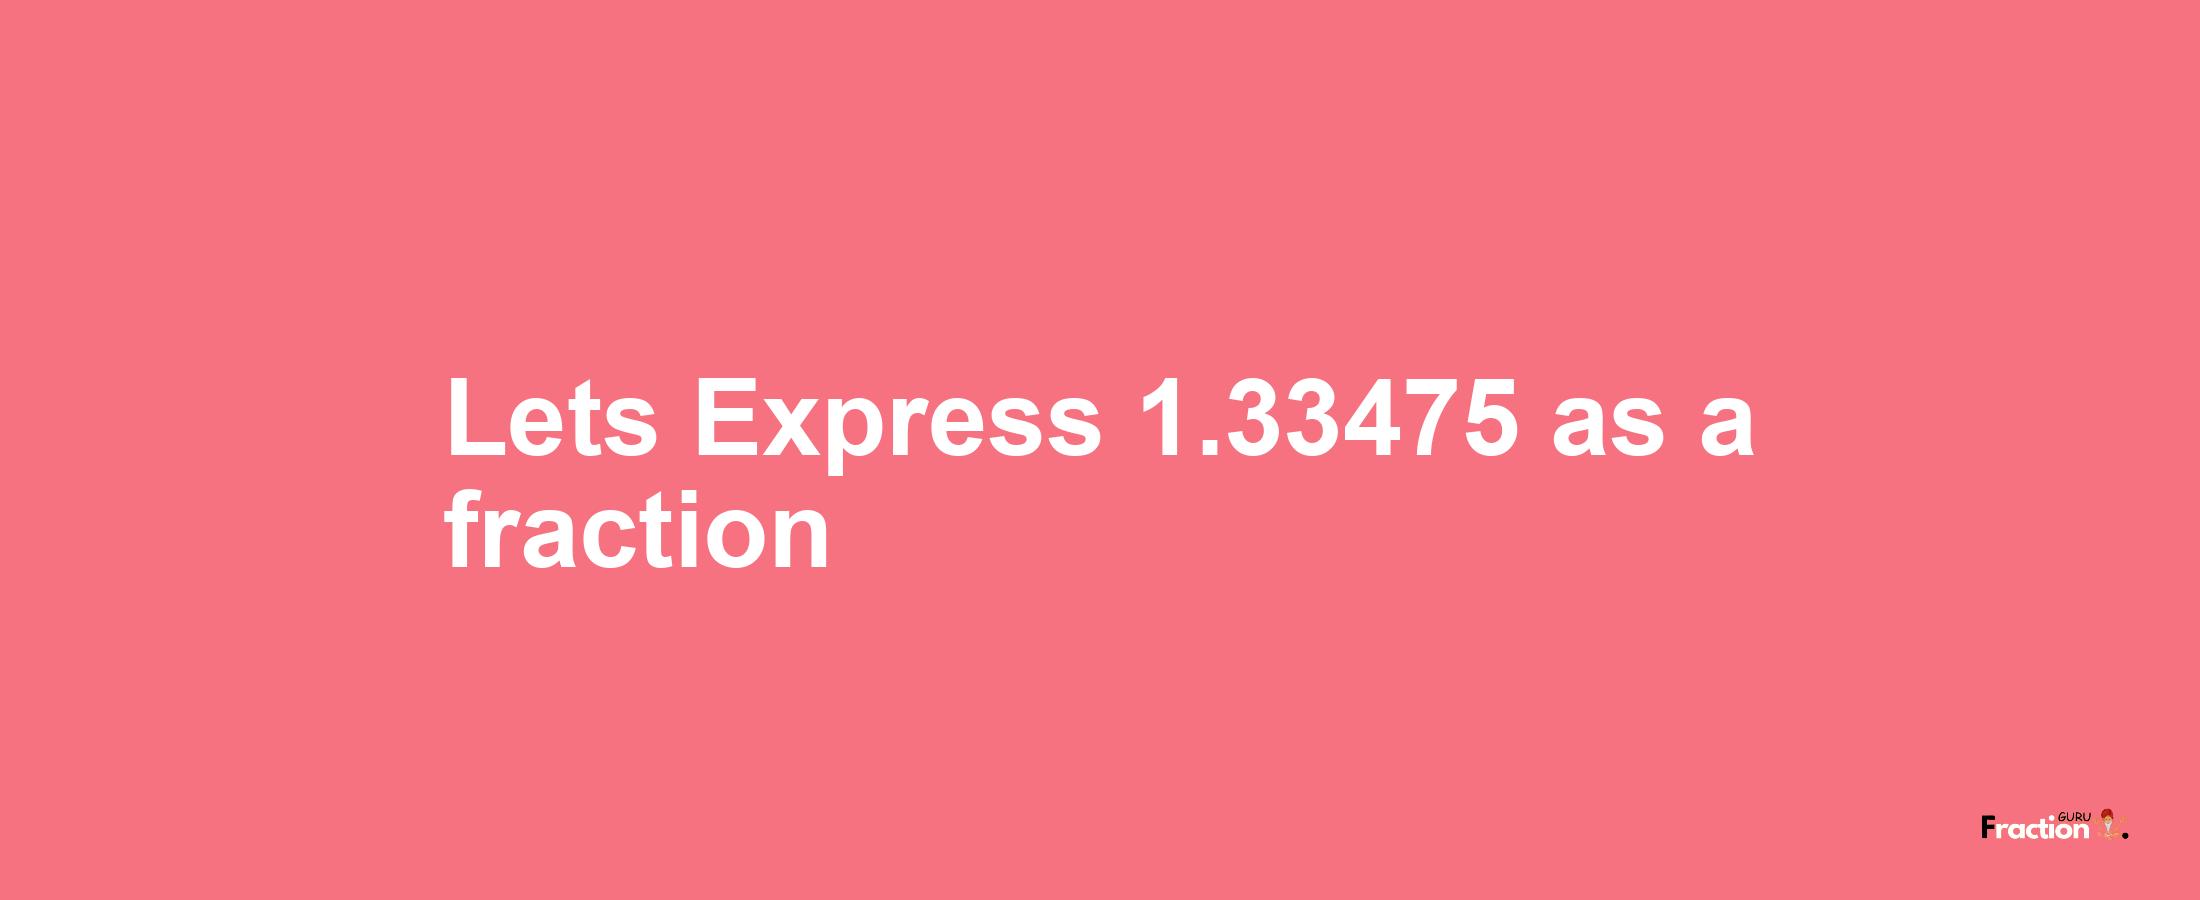 Lets Express 1.33475 as afraction